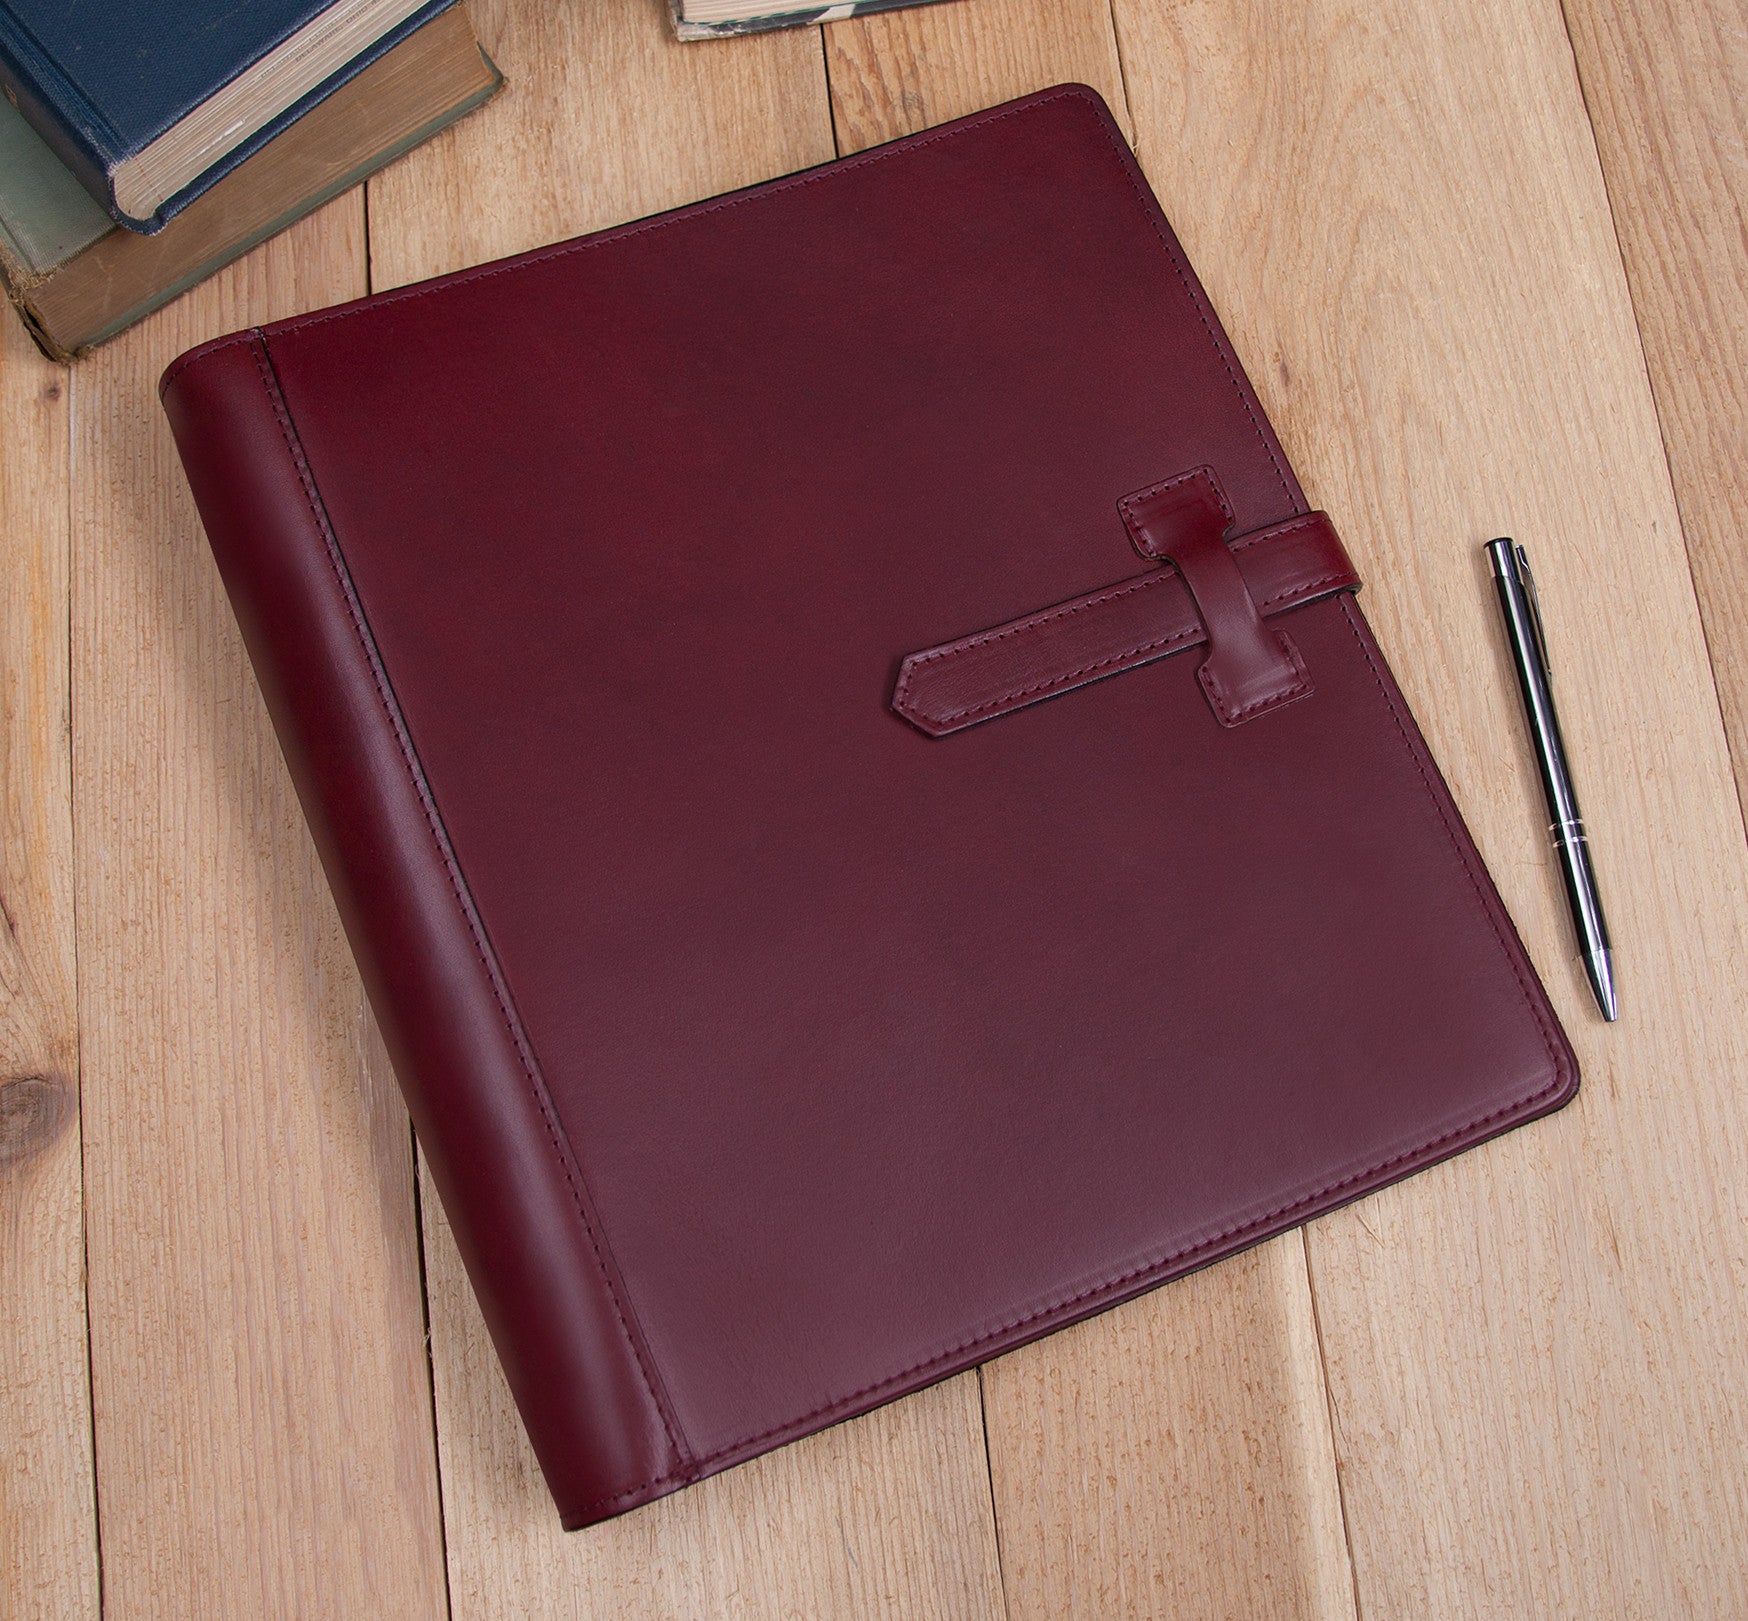 Leather 3 Ring Presenataion Binder - English Bridle Leather - McKinley  Leather